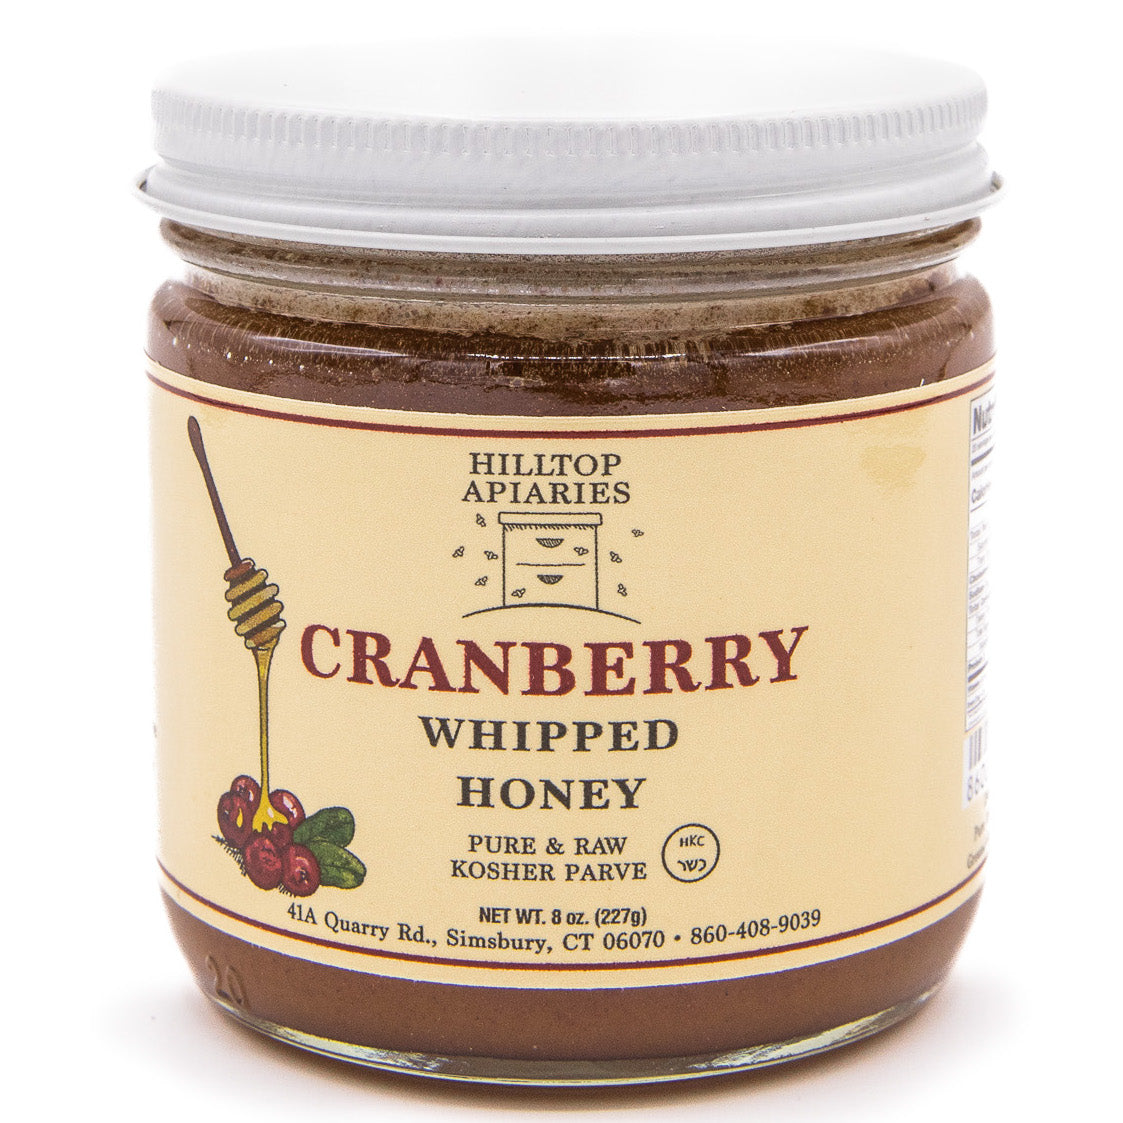 Cranberry Whipped Honey Spread